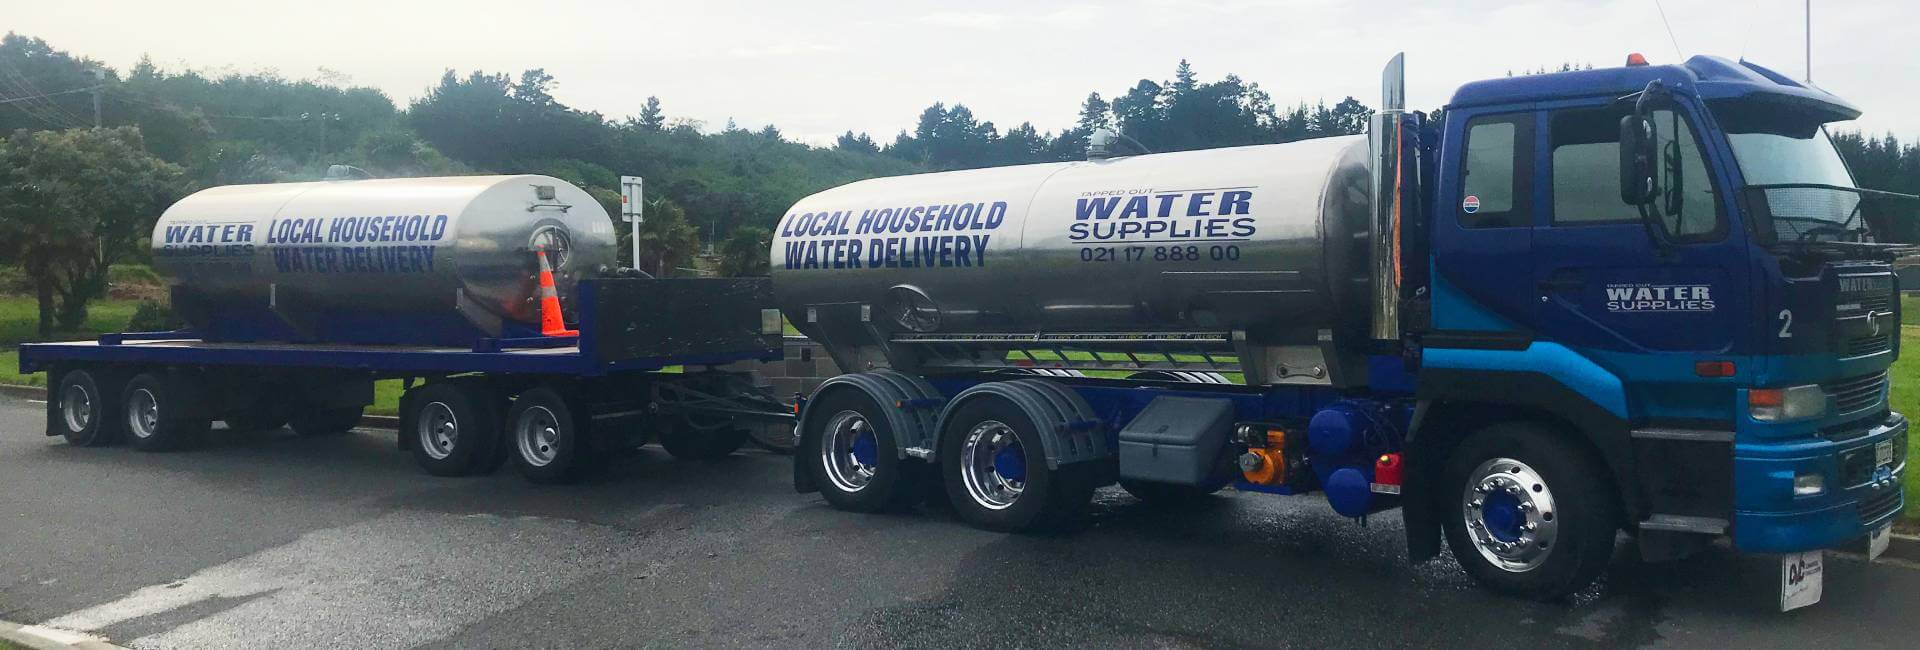 Tapped Out Water Supplies truck and trailer